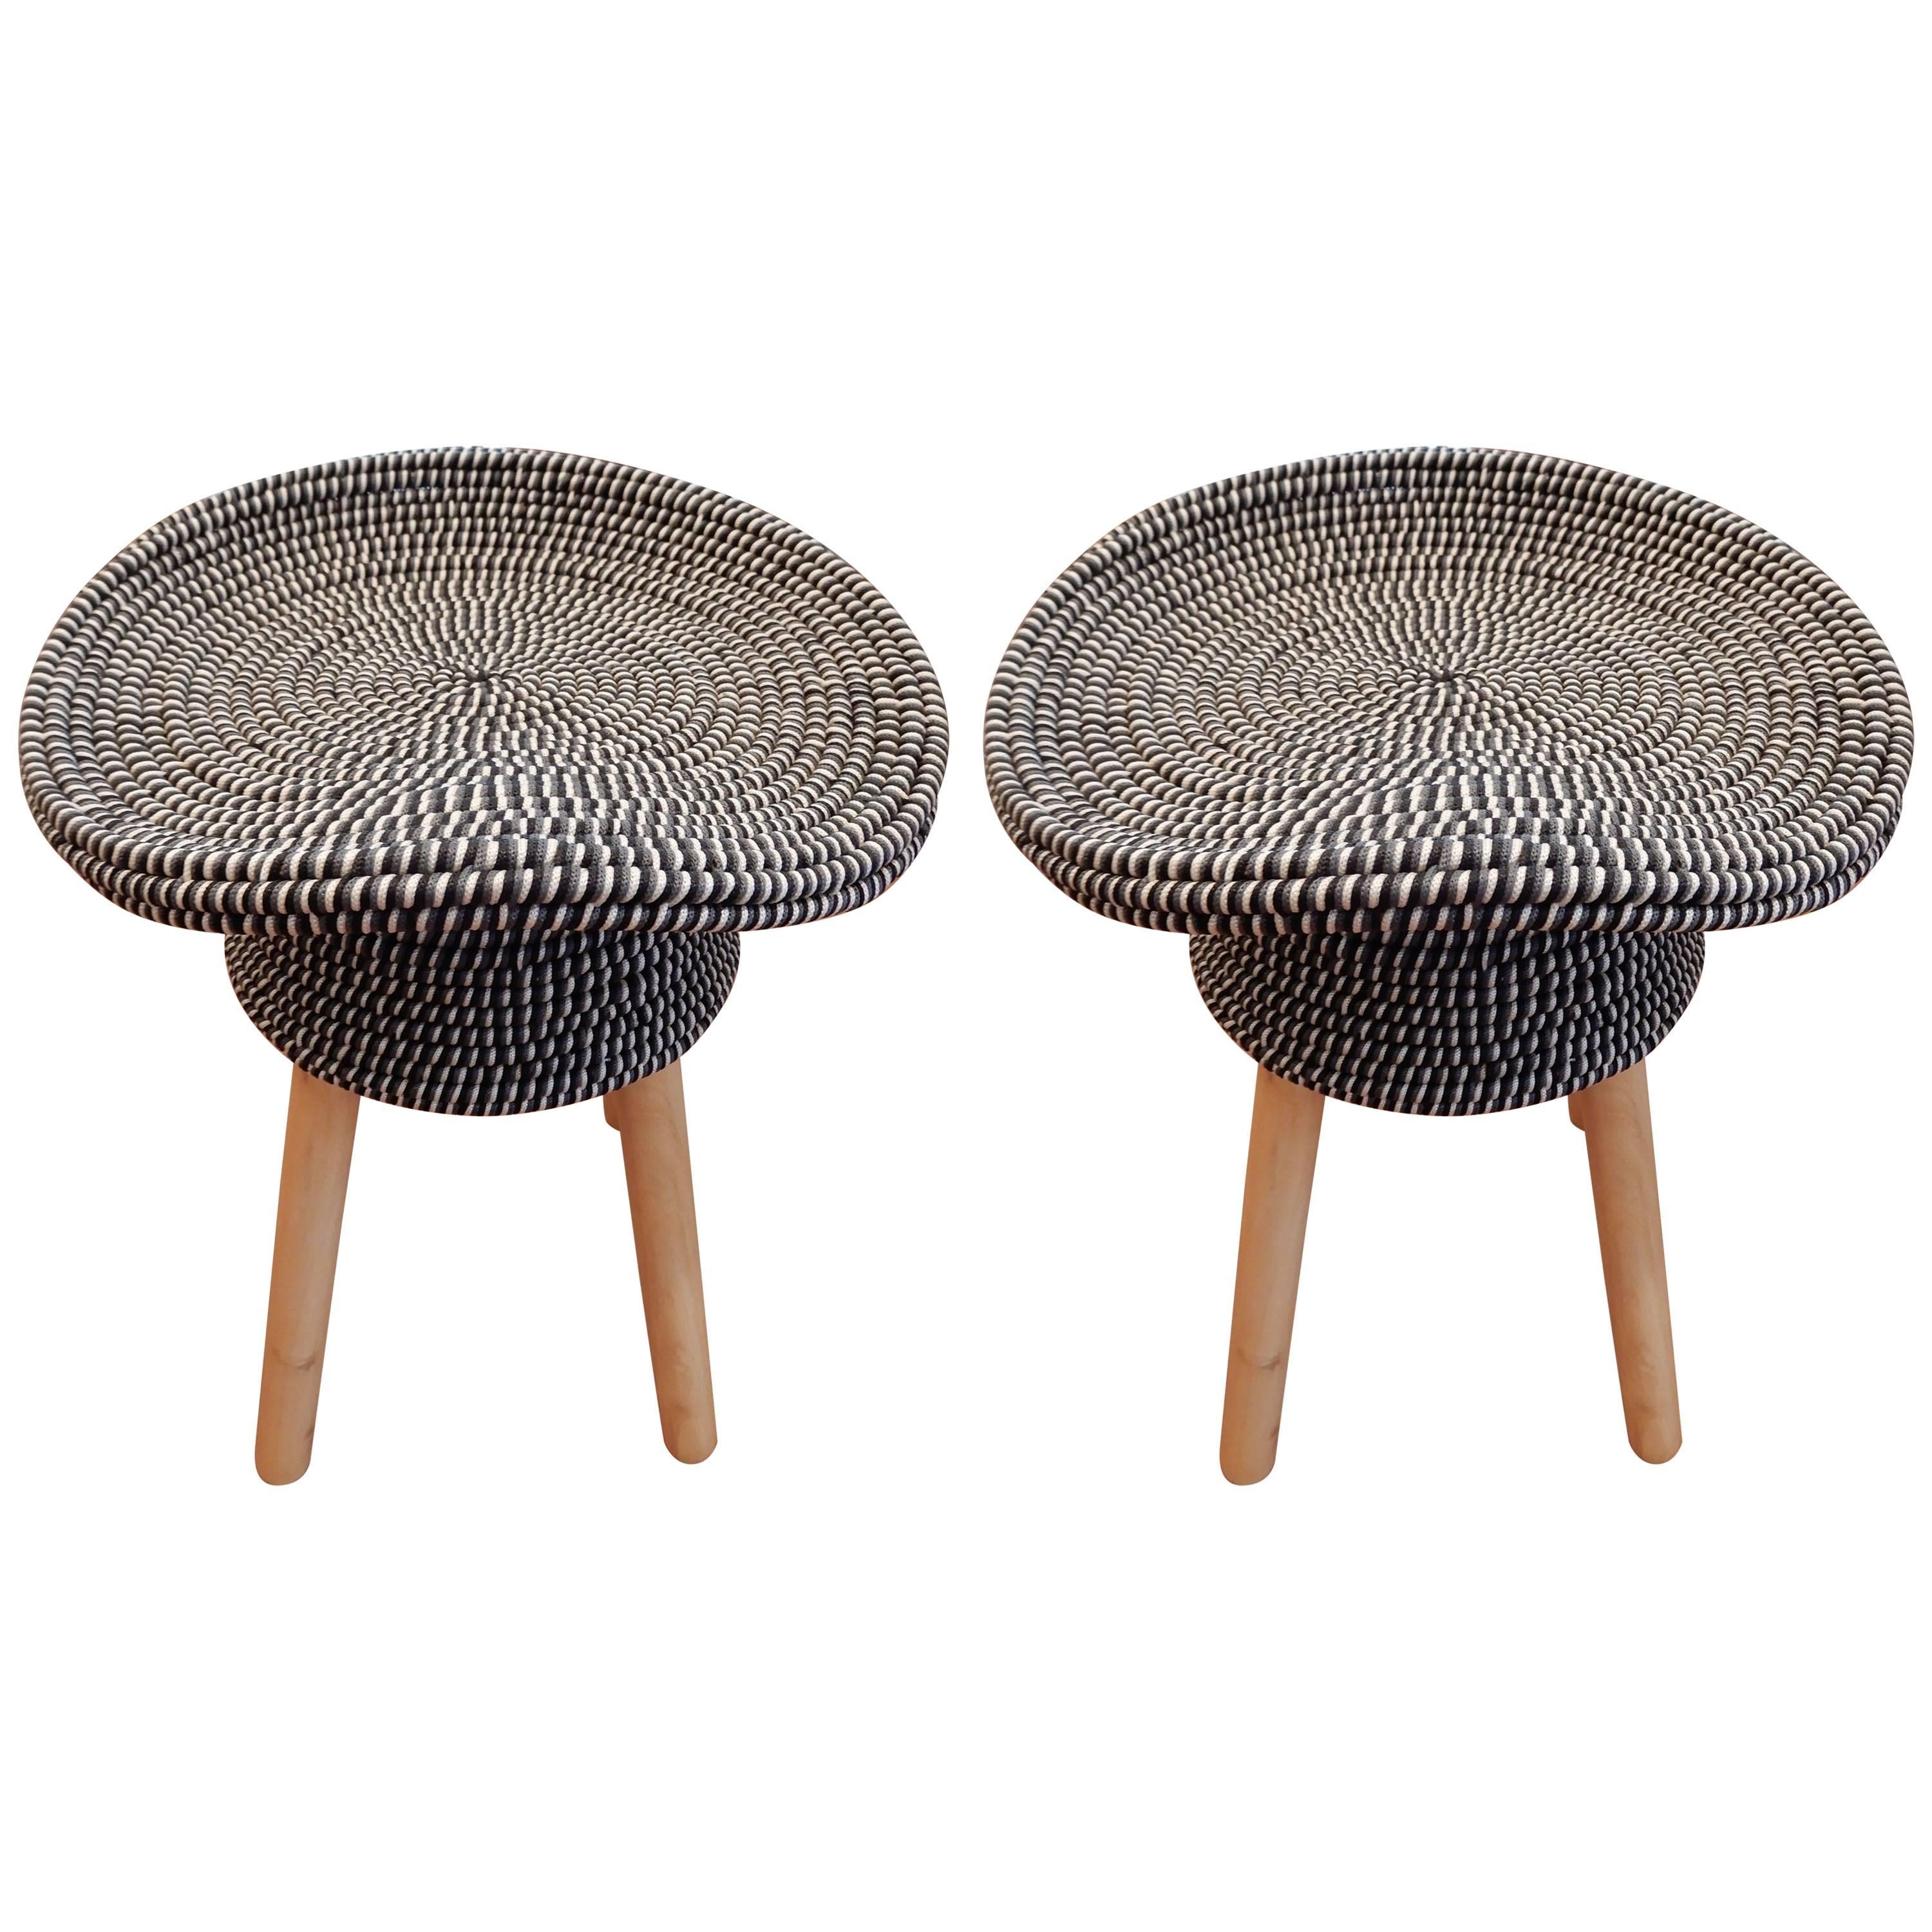 Pair of French Hat Stools